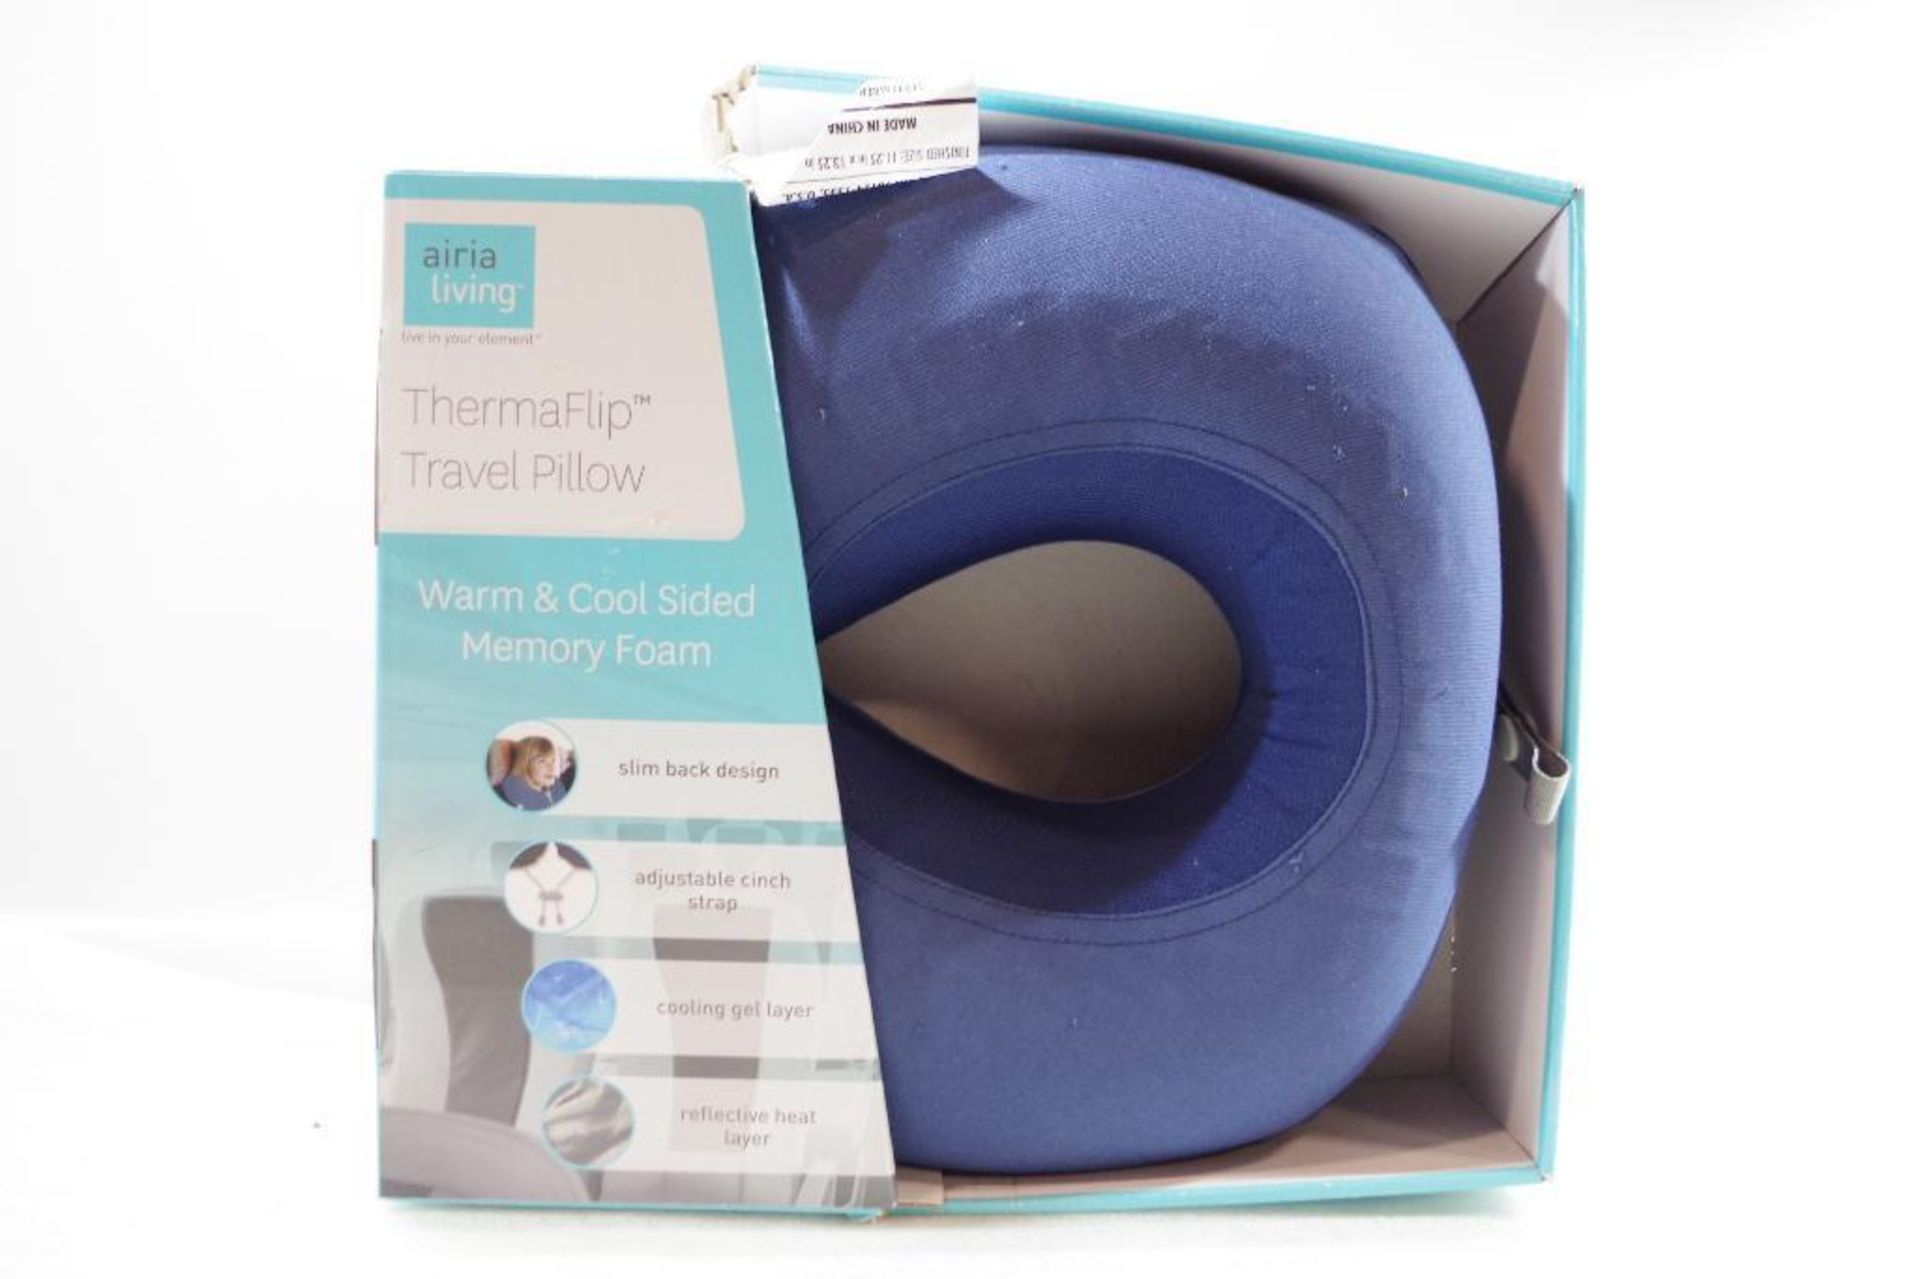 AIRIA LIVING ThermaFlip Travel Pillow Warm & Cool Sided (Store Return)